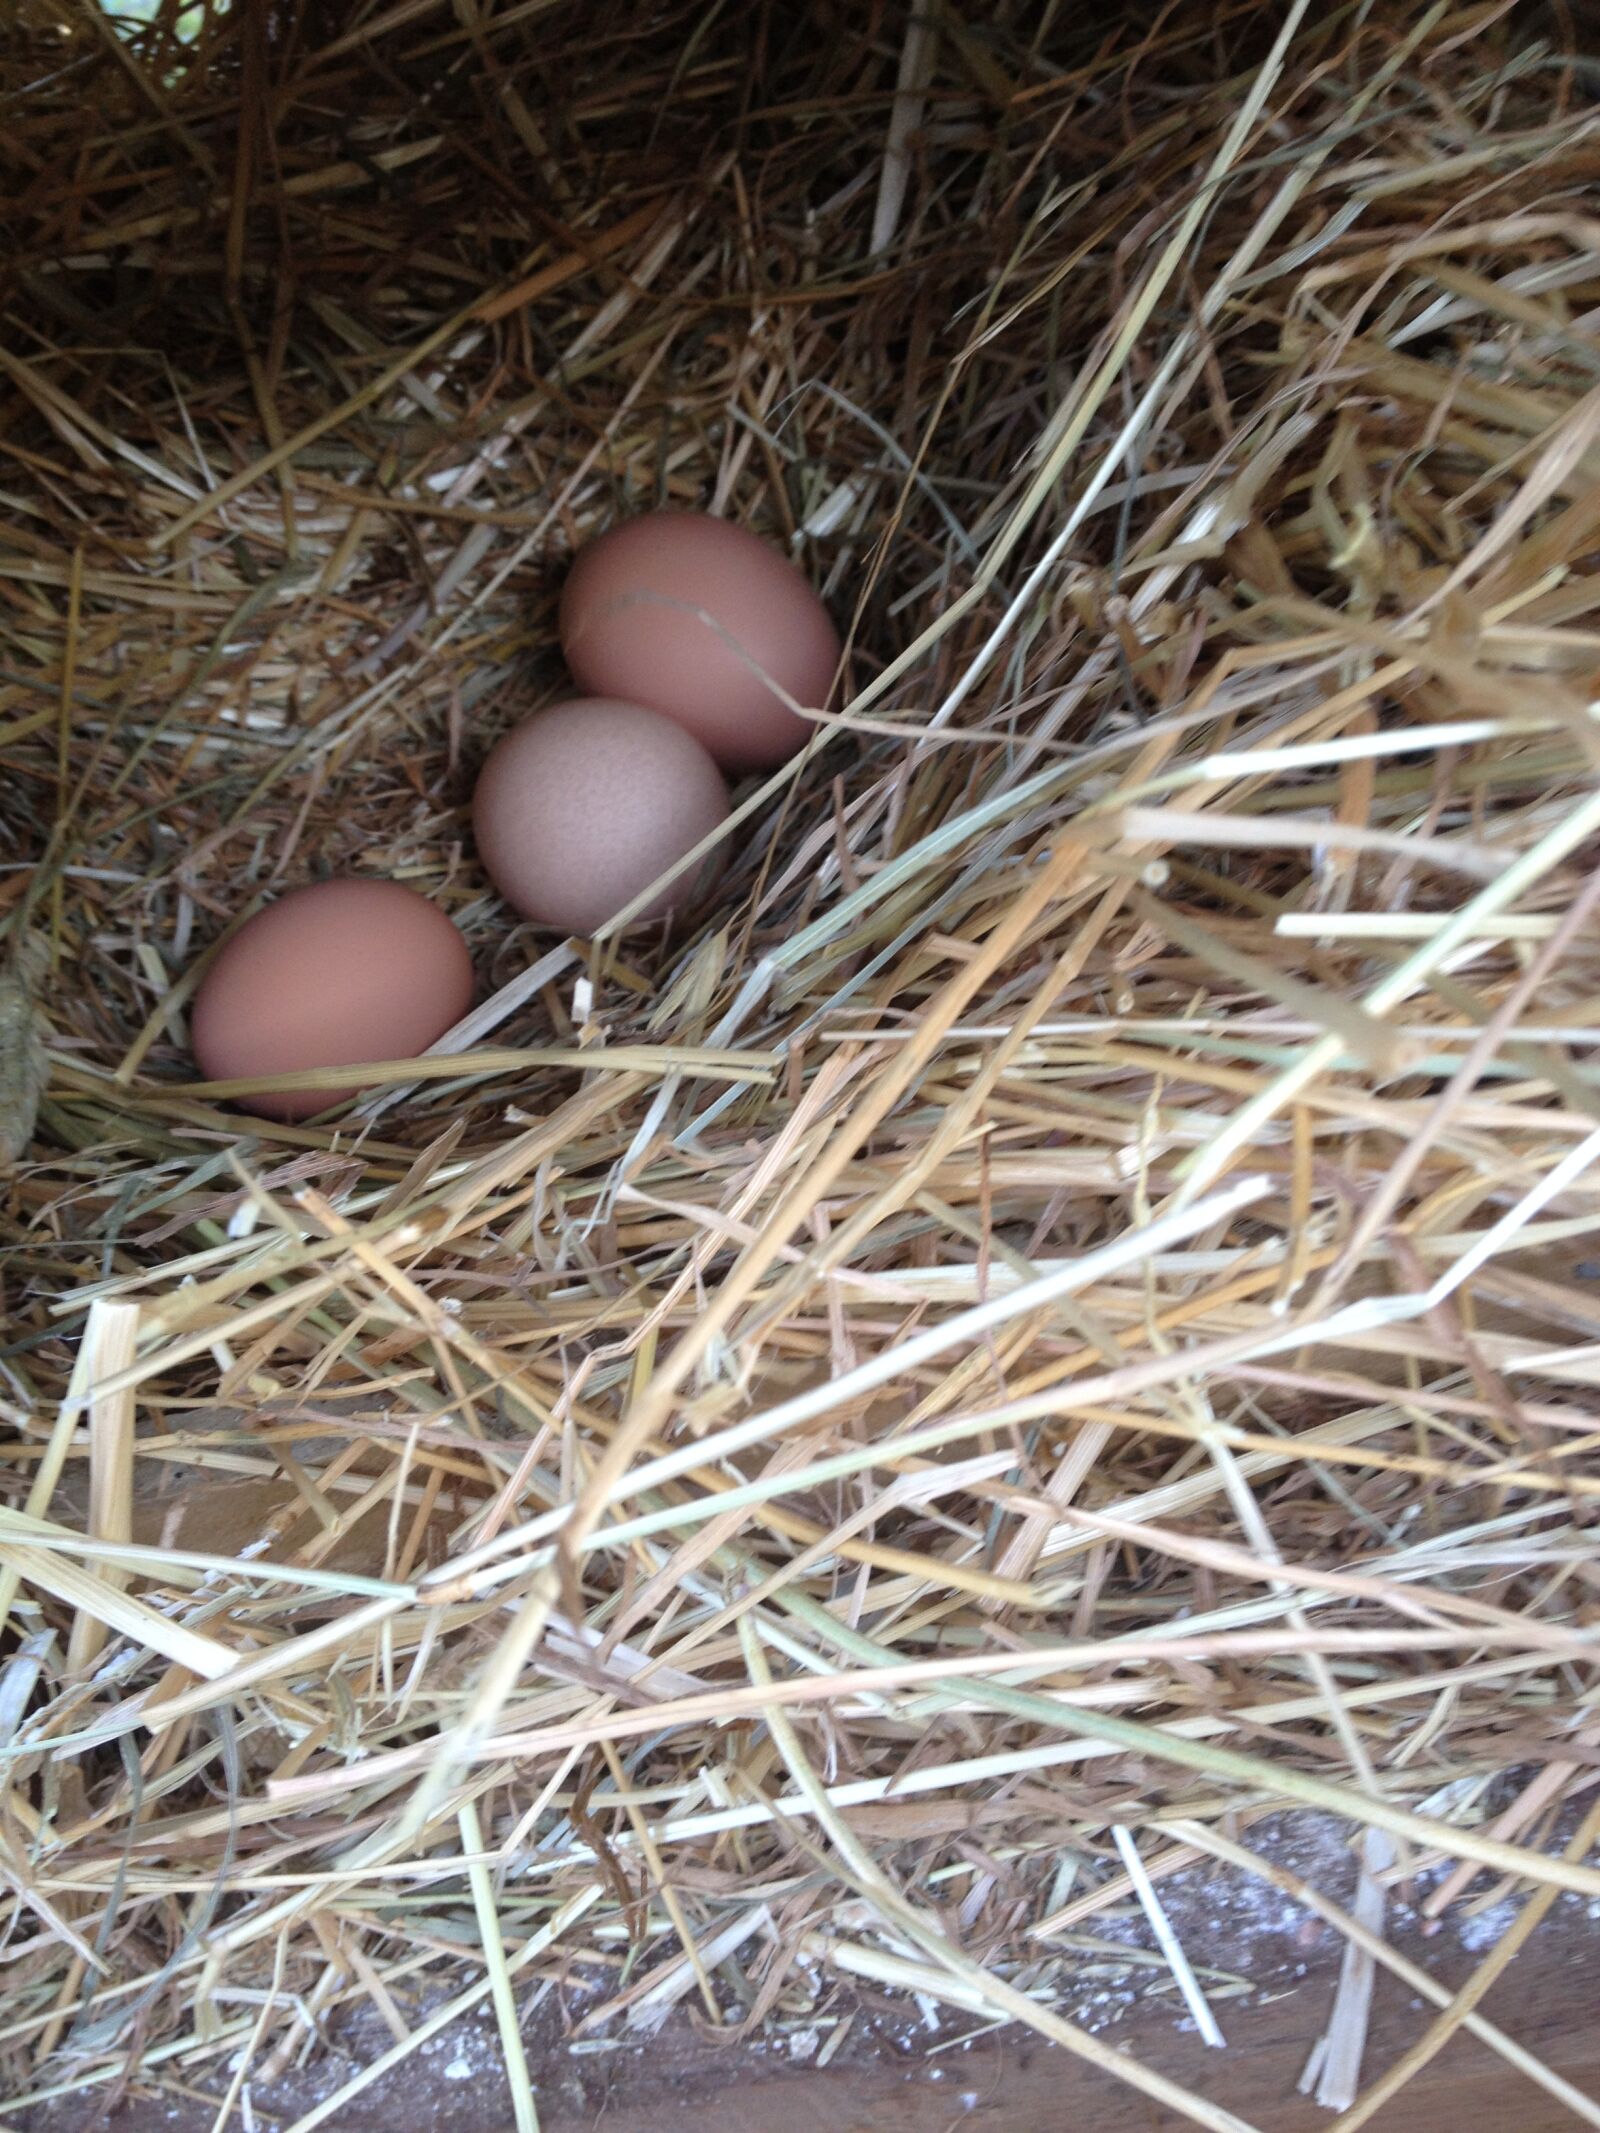 Apple iPhone 4S sample photo. Eggs, poultry, organic photography